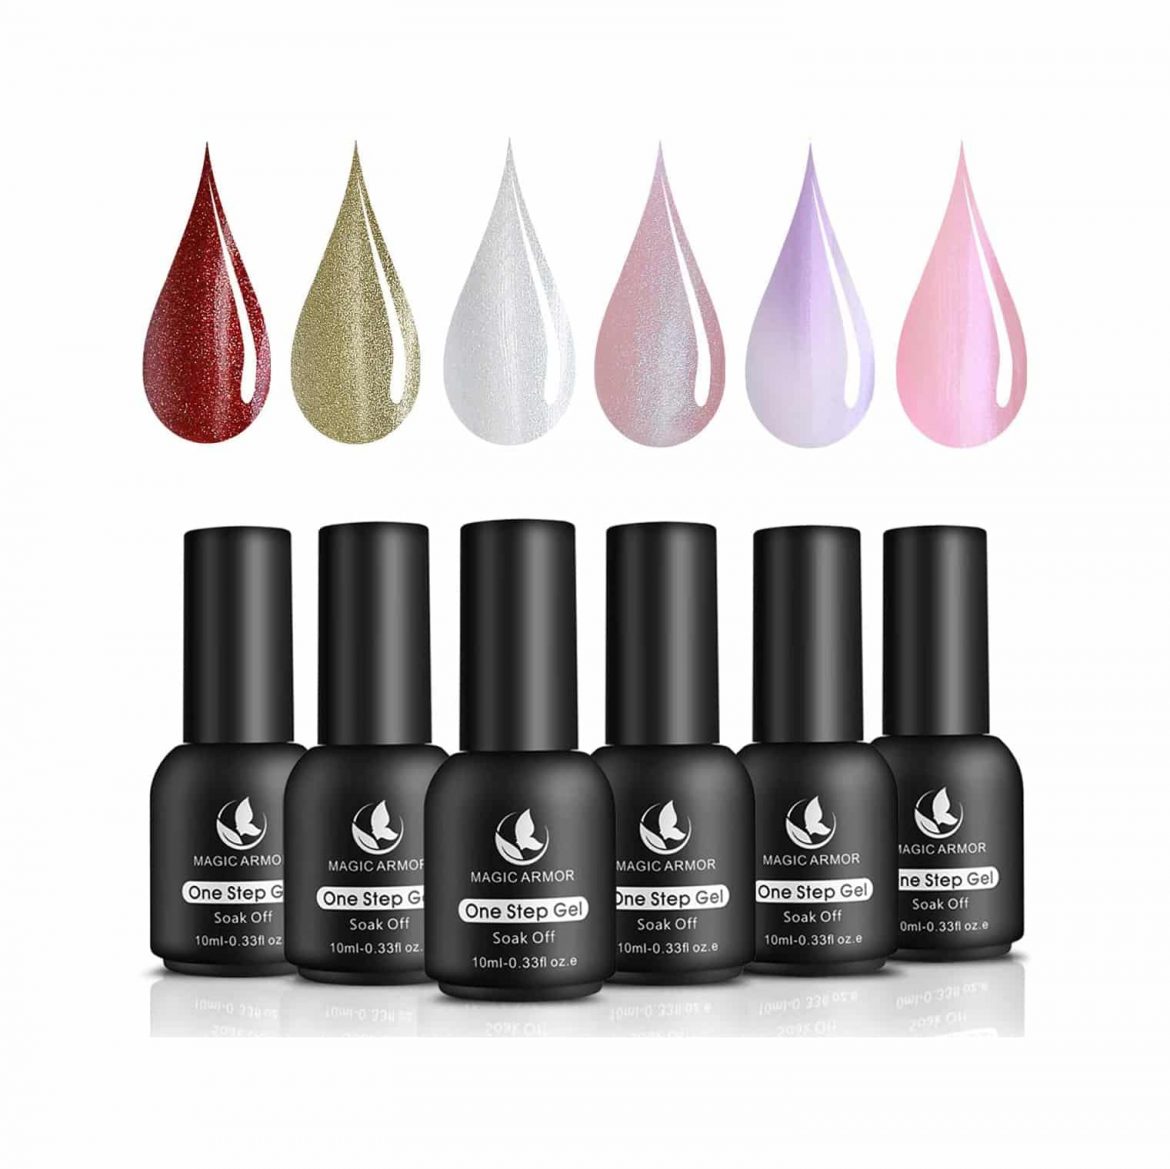 Top 10 Best Nail Polishes in 2021 Reviews | Buyer's Guide